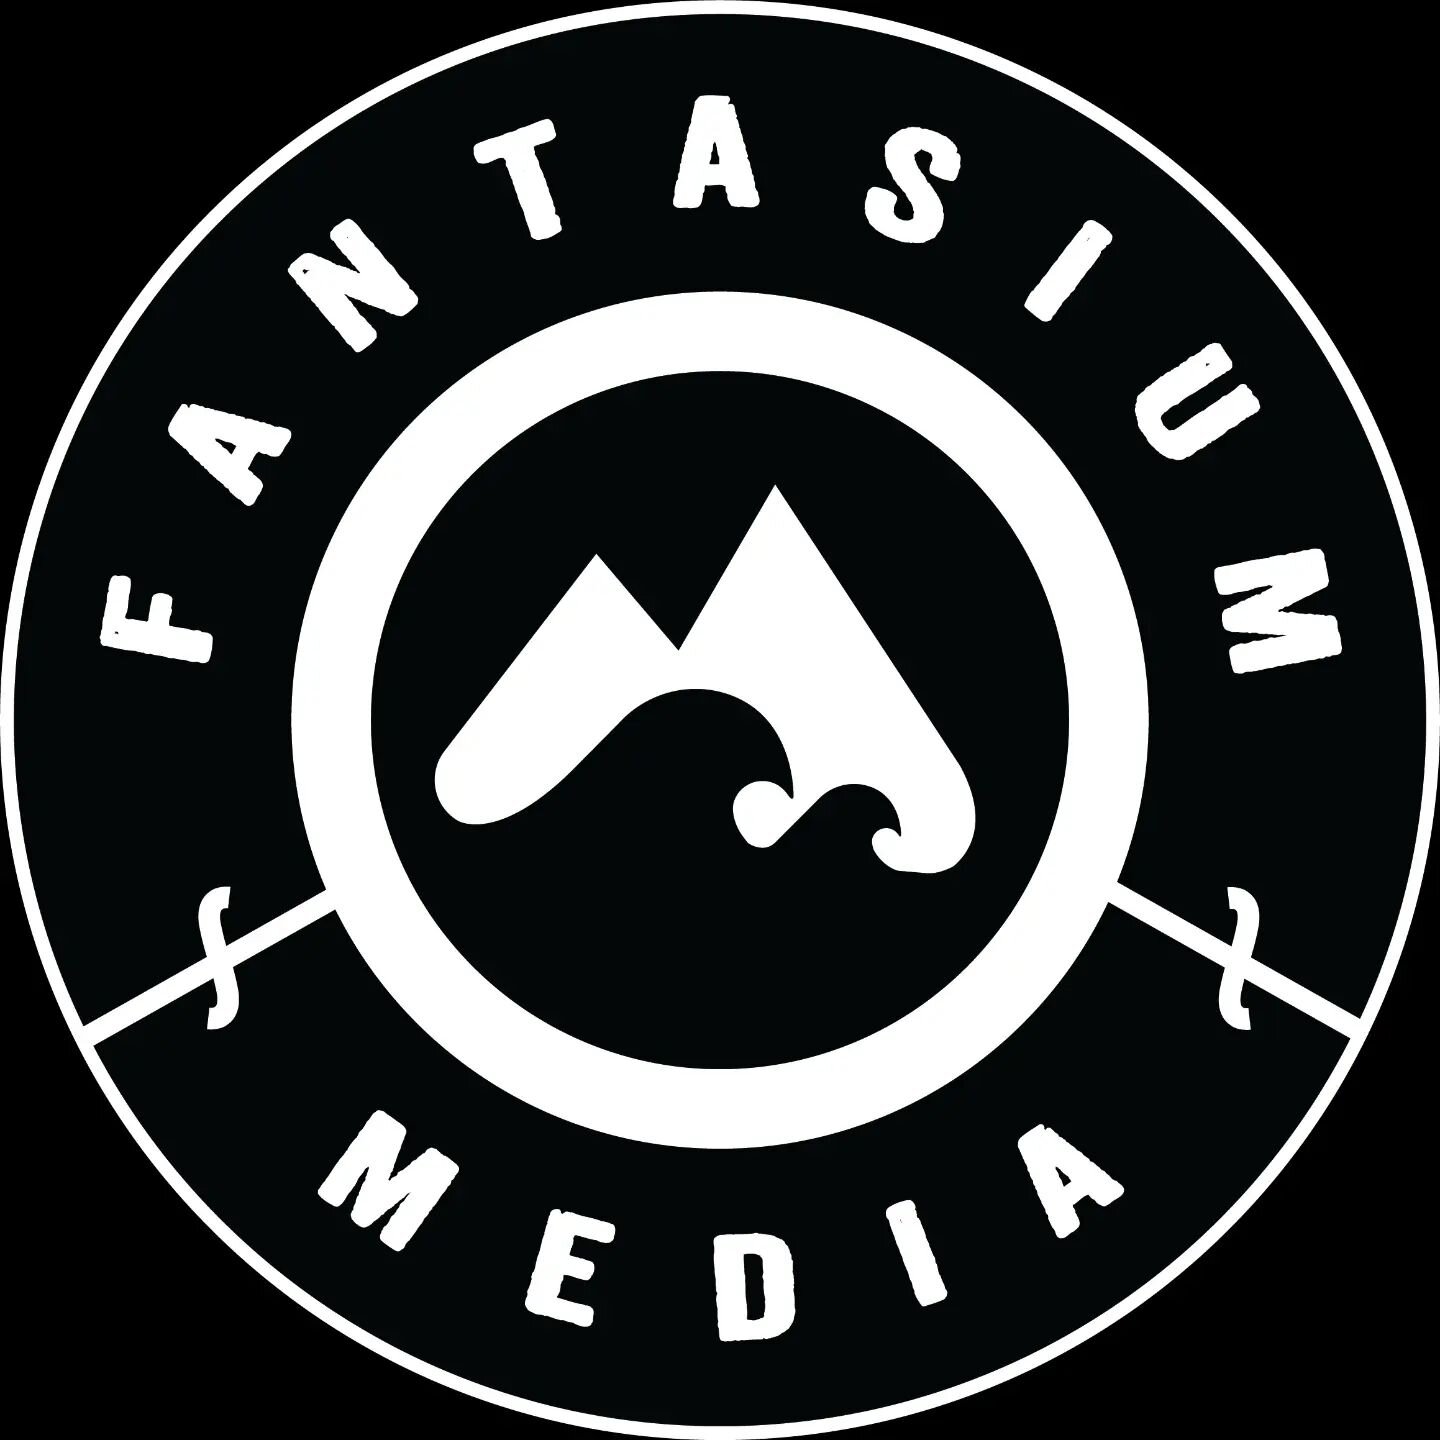 Hey Fantasium fam! I'm super excited (and slightly nervous) to share that I'm finally in a position to focus full time on Fantasium. I'll be providing a variety of services including eCommerce consulting, web design, content creation, SEO, and more. 